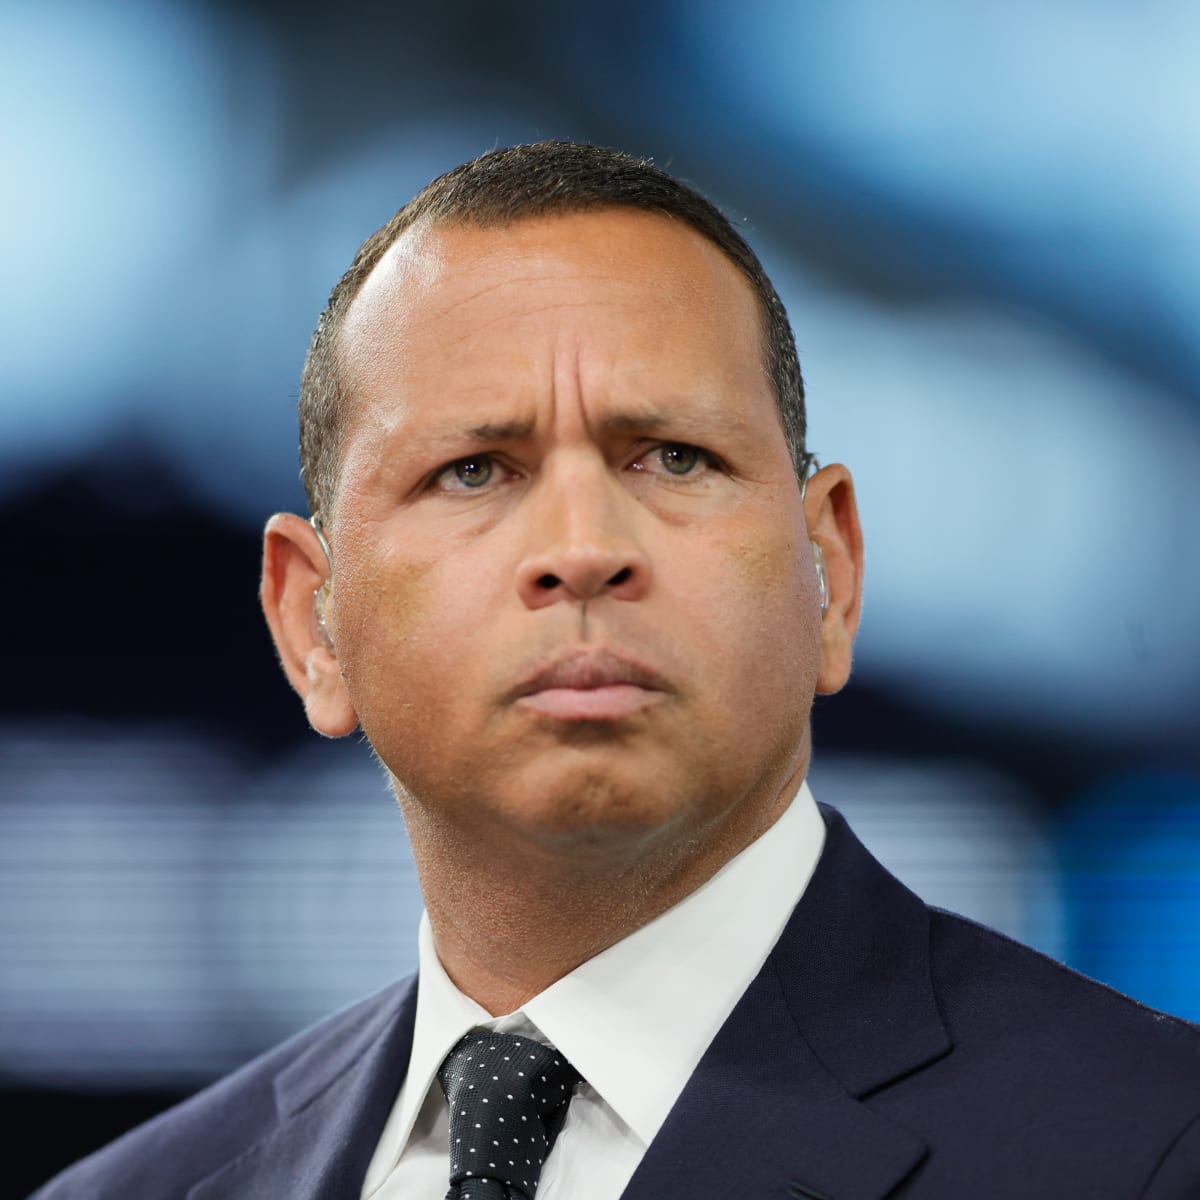 Yankees Legend Alex Rodriguez Diagnosed With Early-Stage Gum